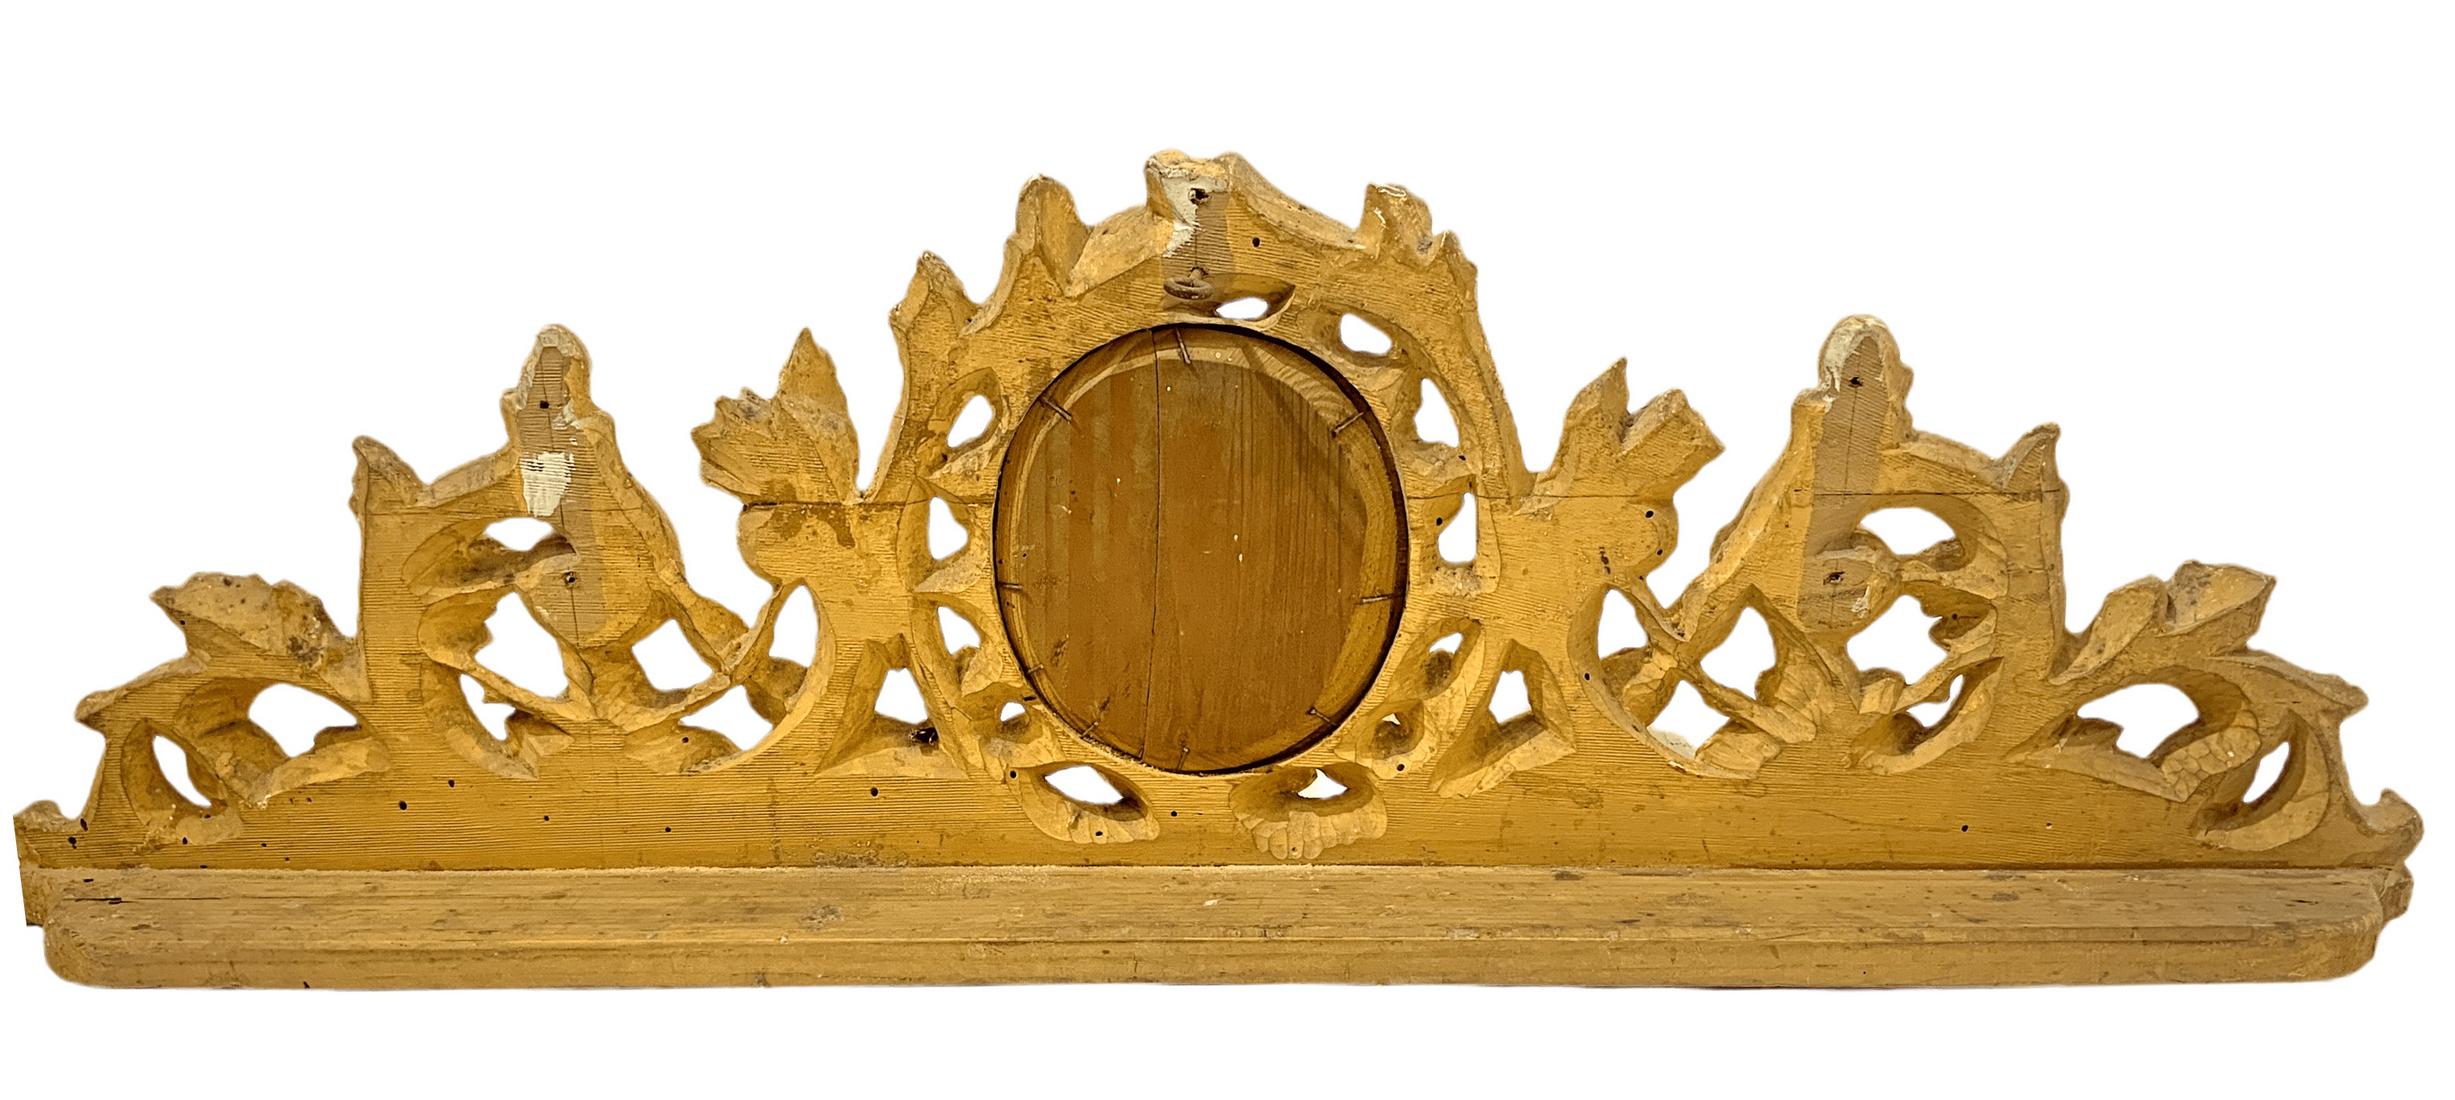 Frieze gilded wooden leaf with a small central oval mirror, eighteenth century. Cm 22x70 - Image 2 of 3